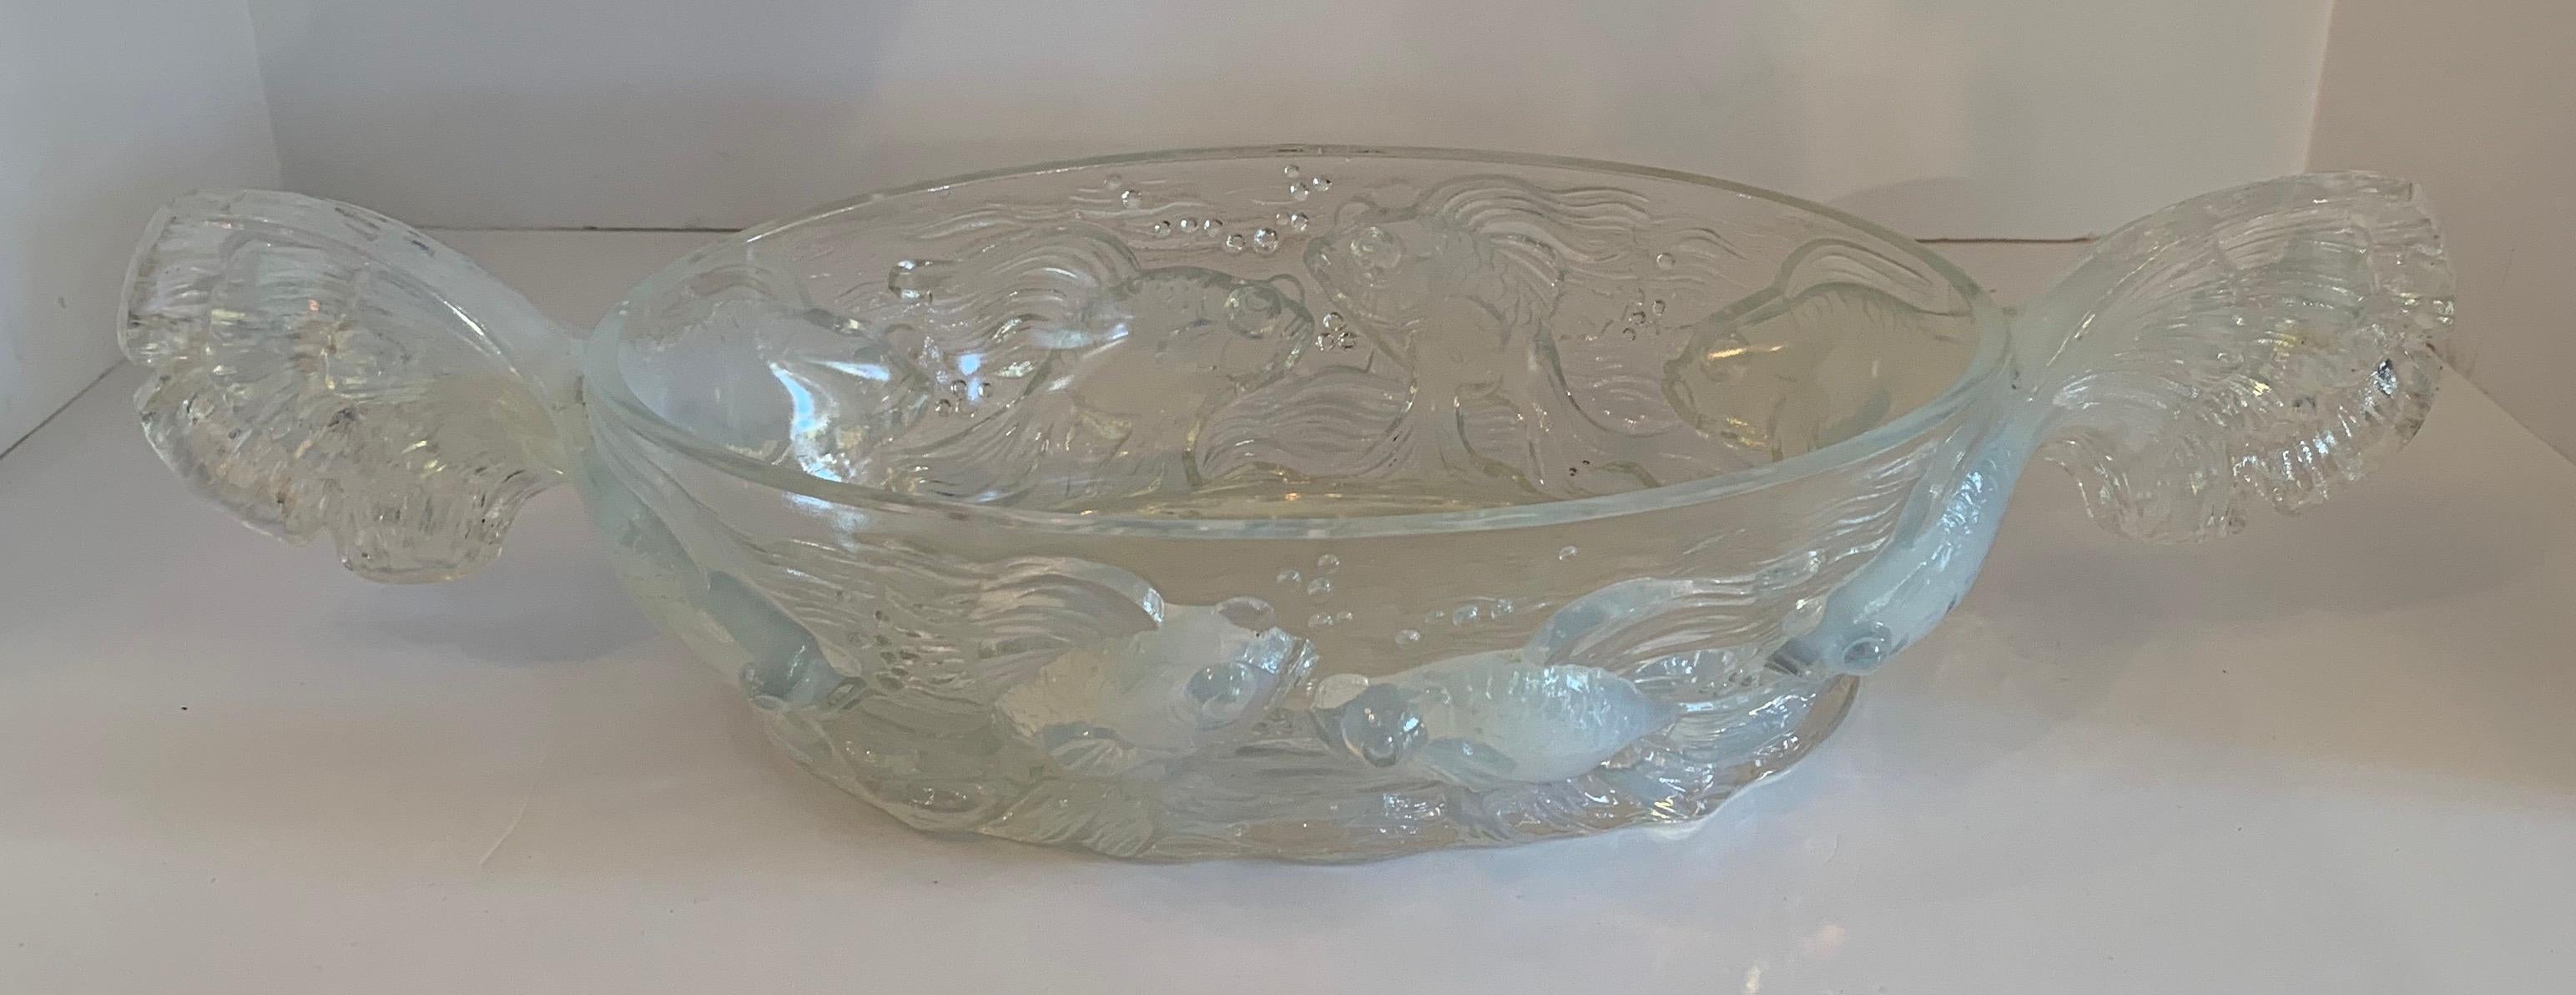 French Art Deco Verlys Opalescent Glass Poissons Koi Fish Oval Centerpiece Bowl 1